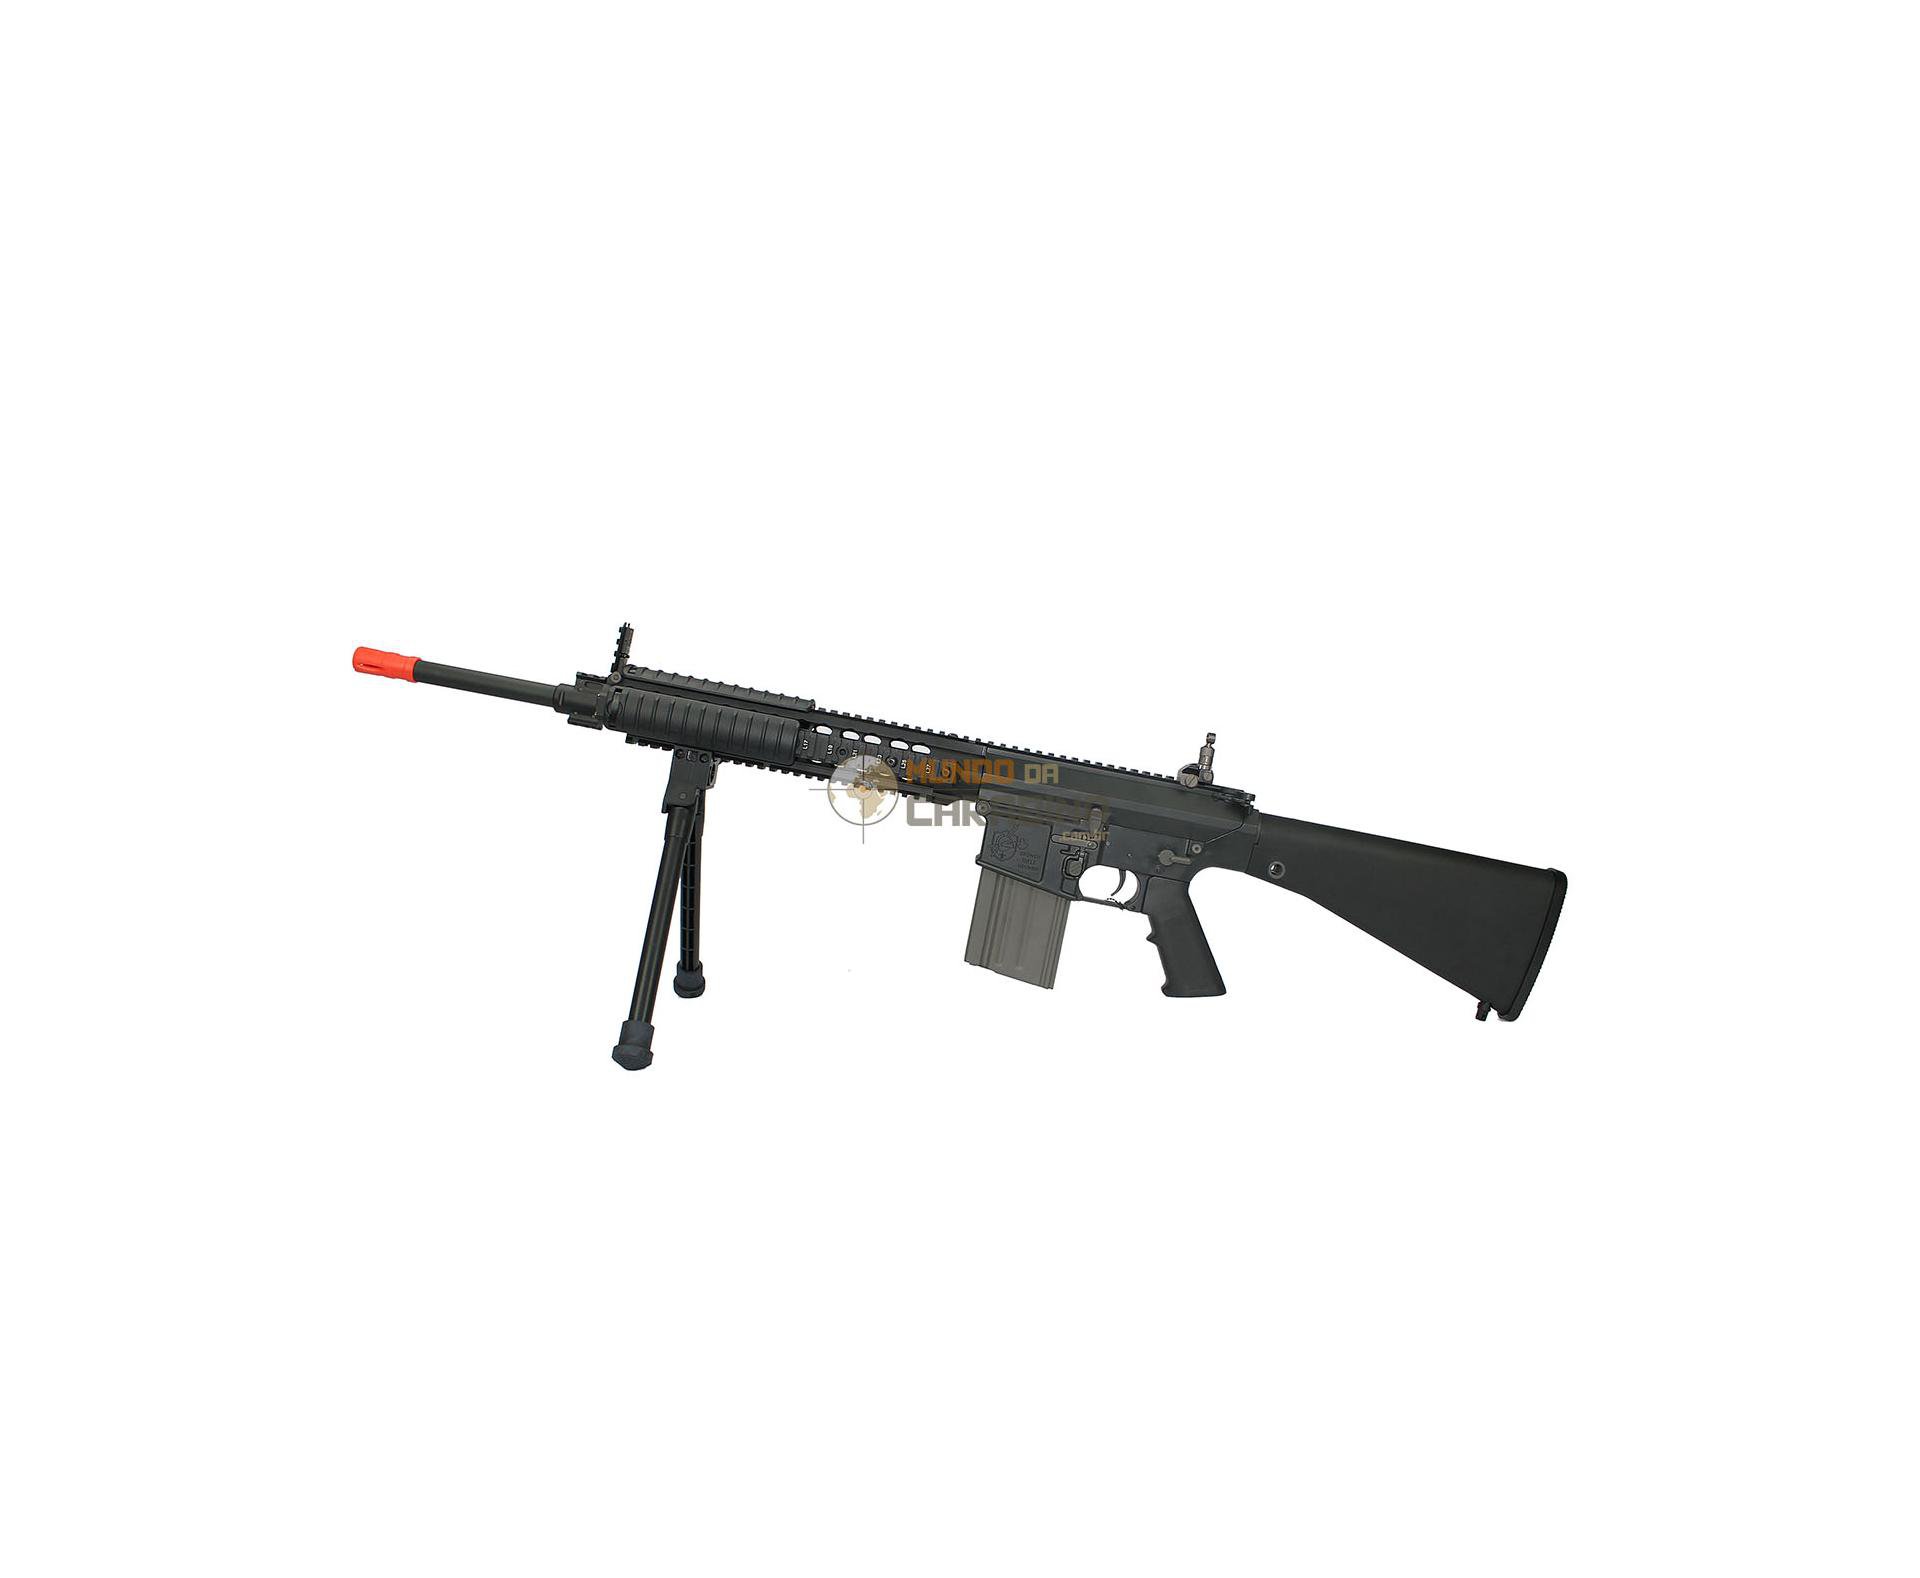 Rifle De Airsoft M110 Semi-auto Sniper System (sass) Full Metal - Ares